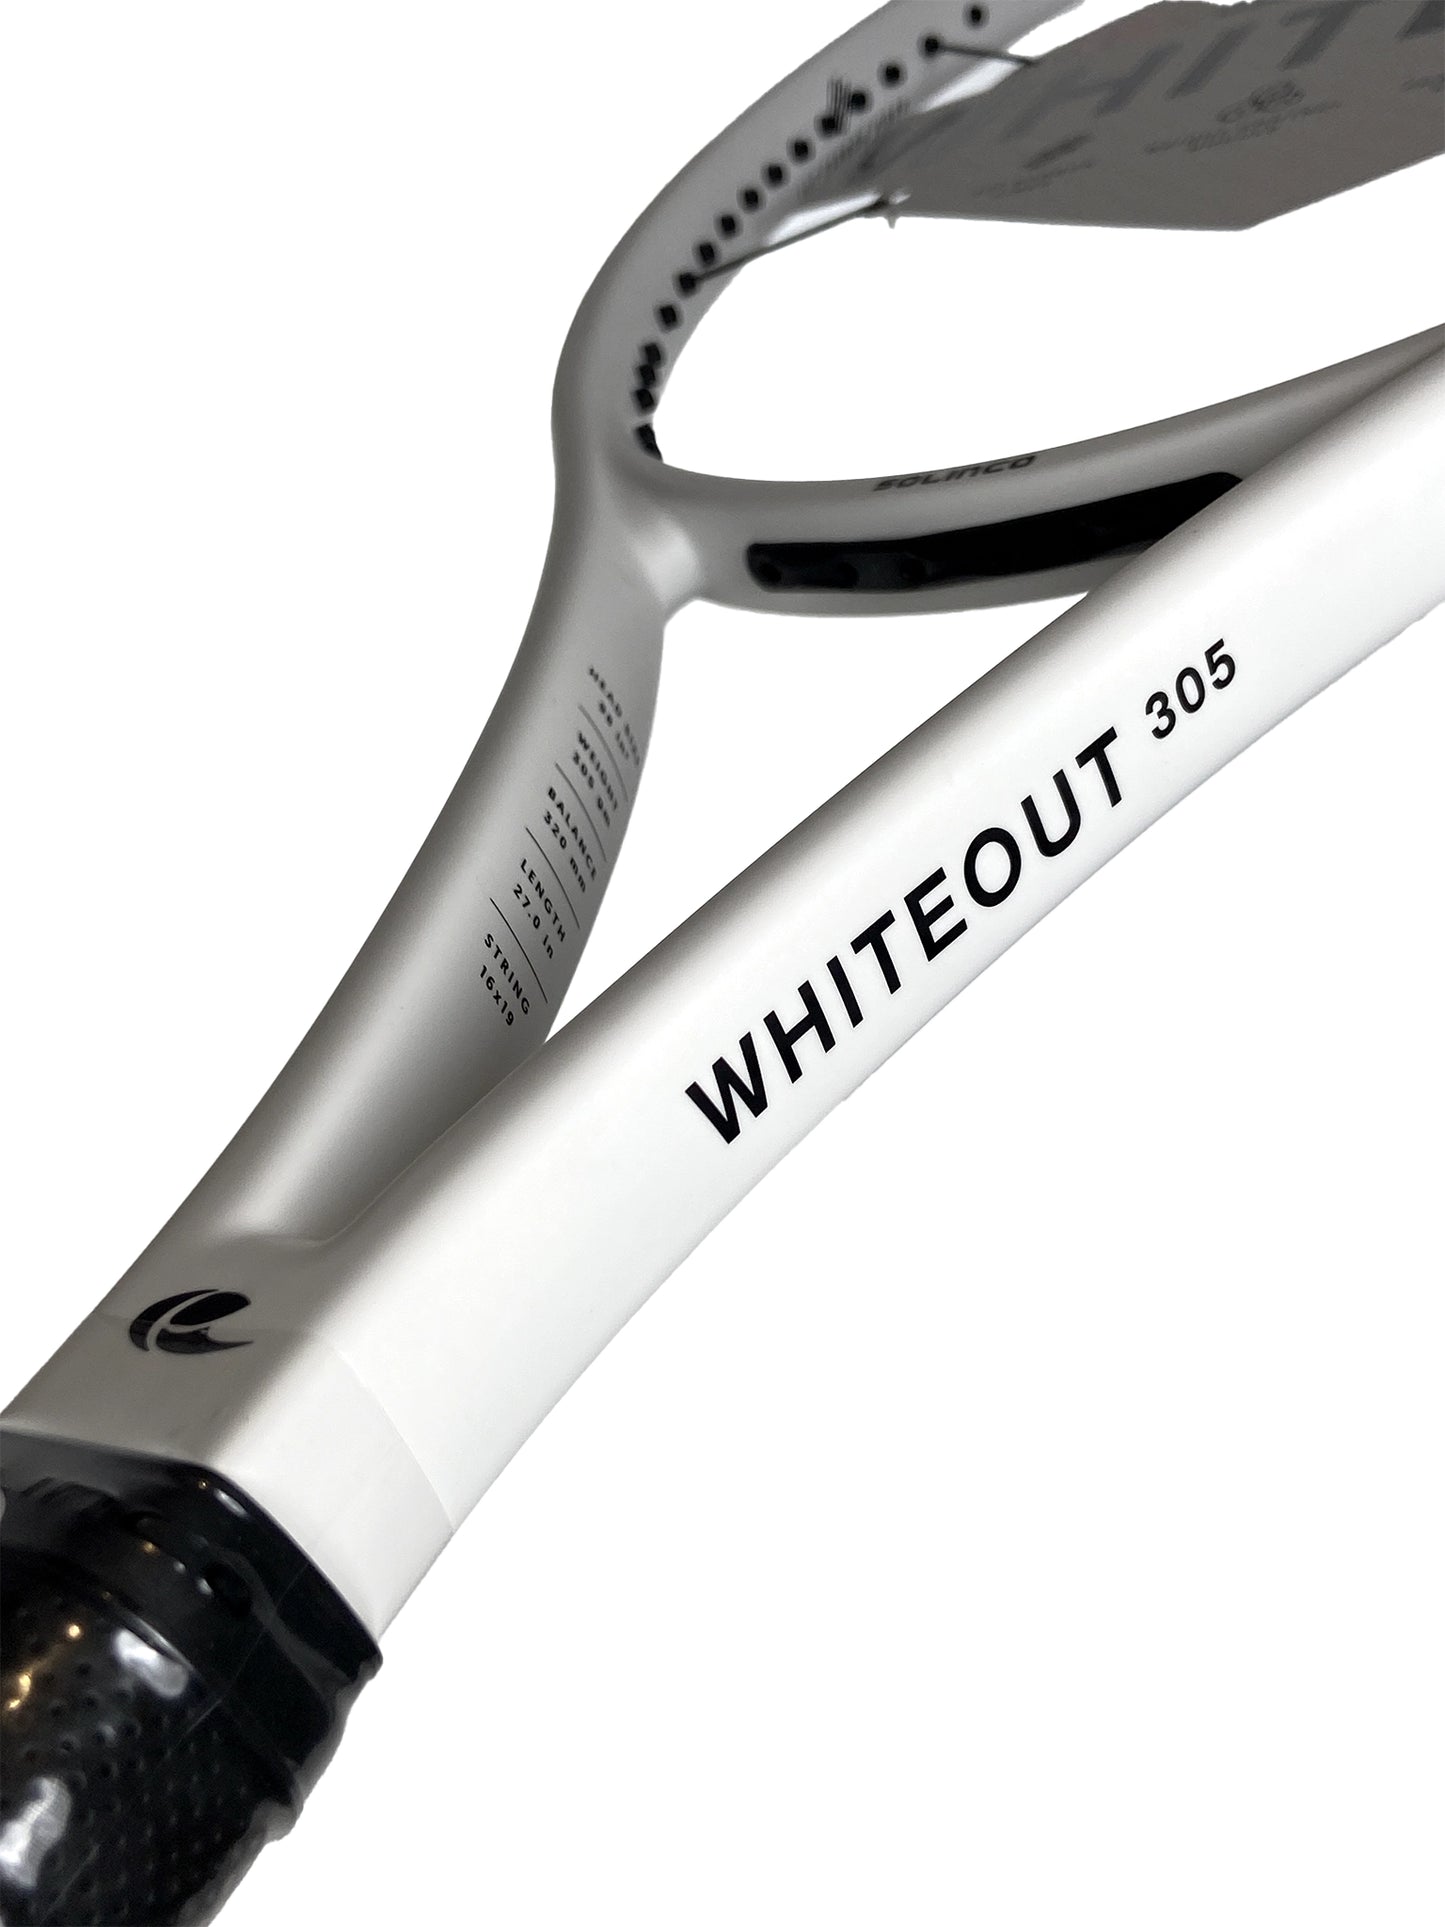 Solinco Whiteout 305g